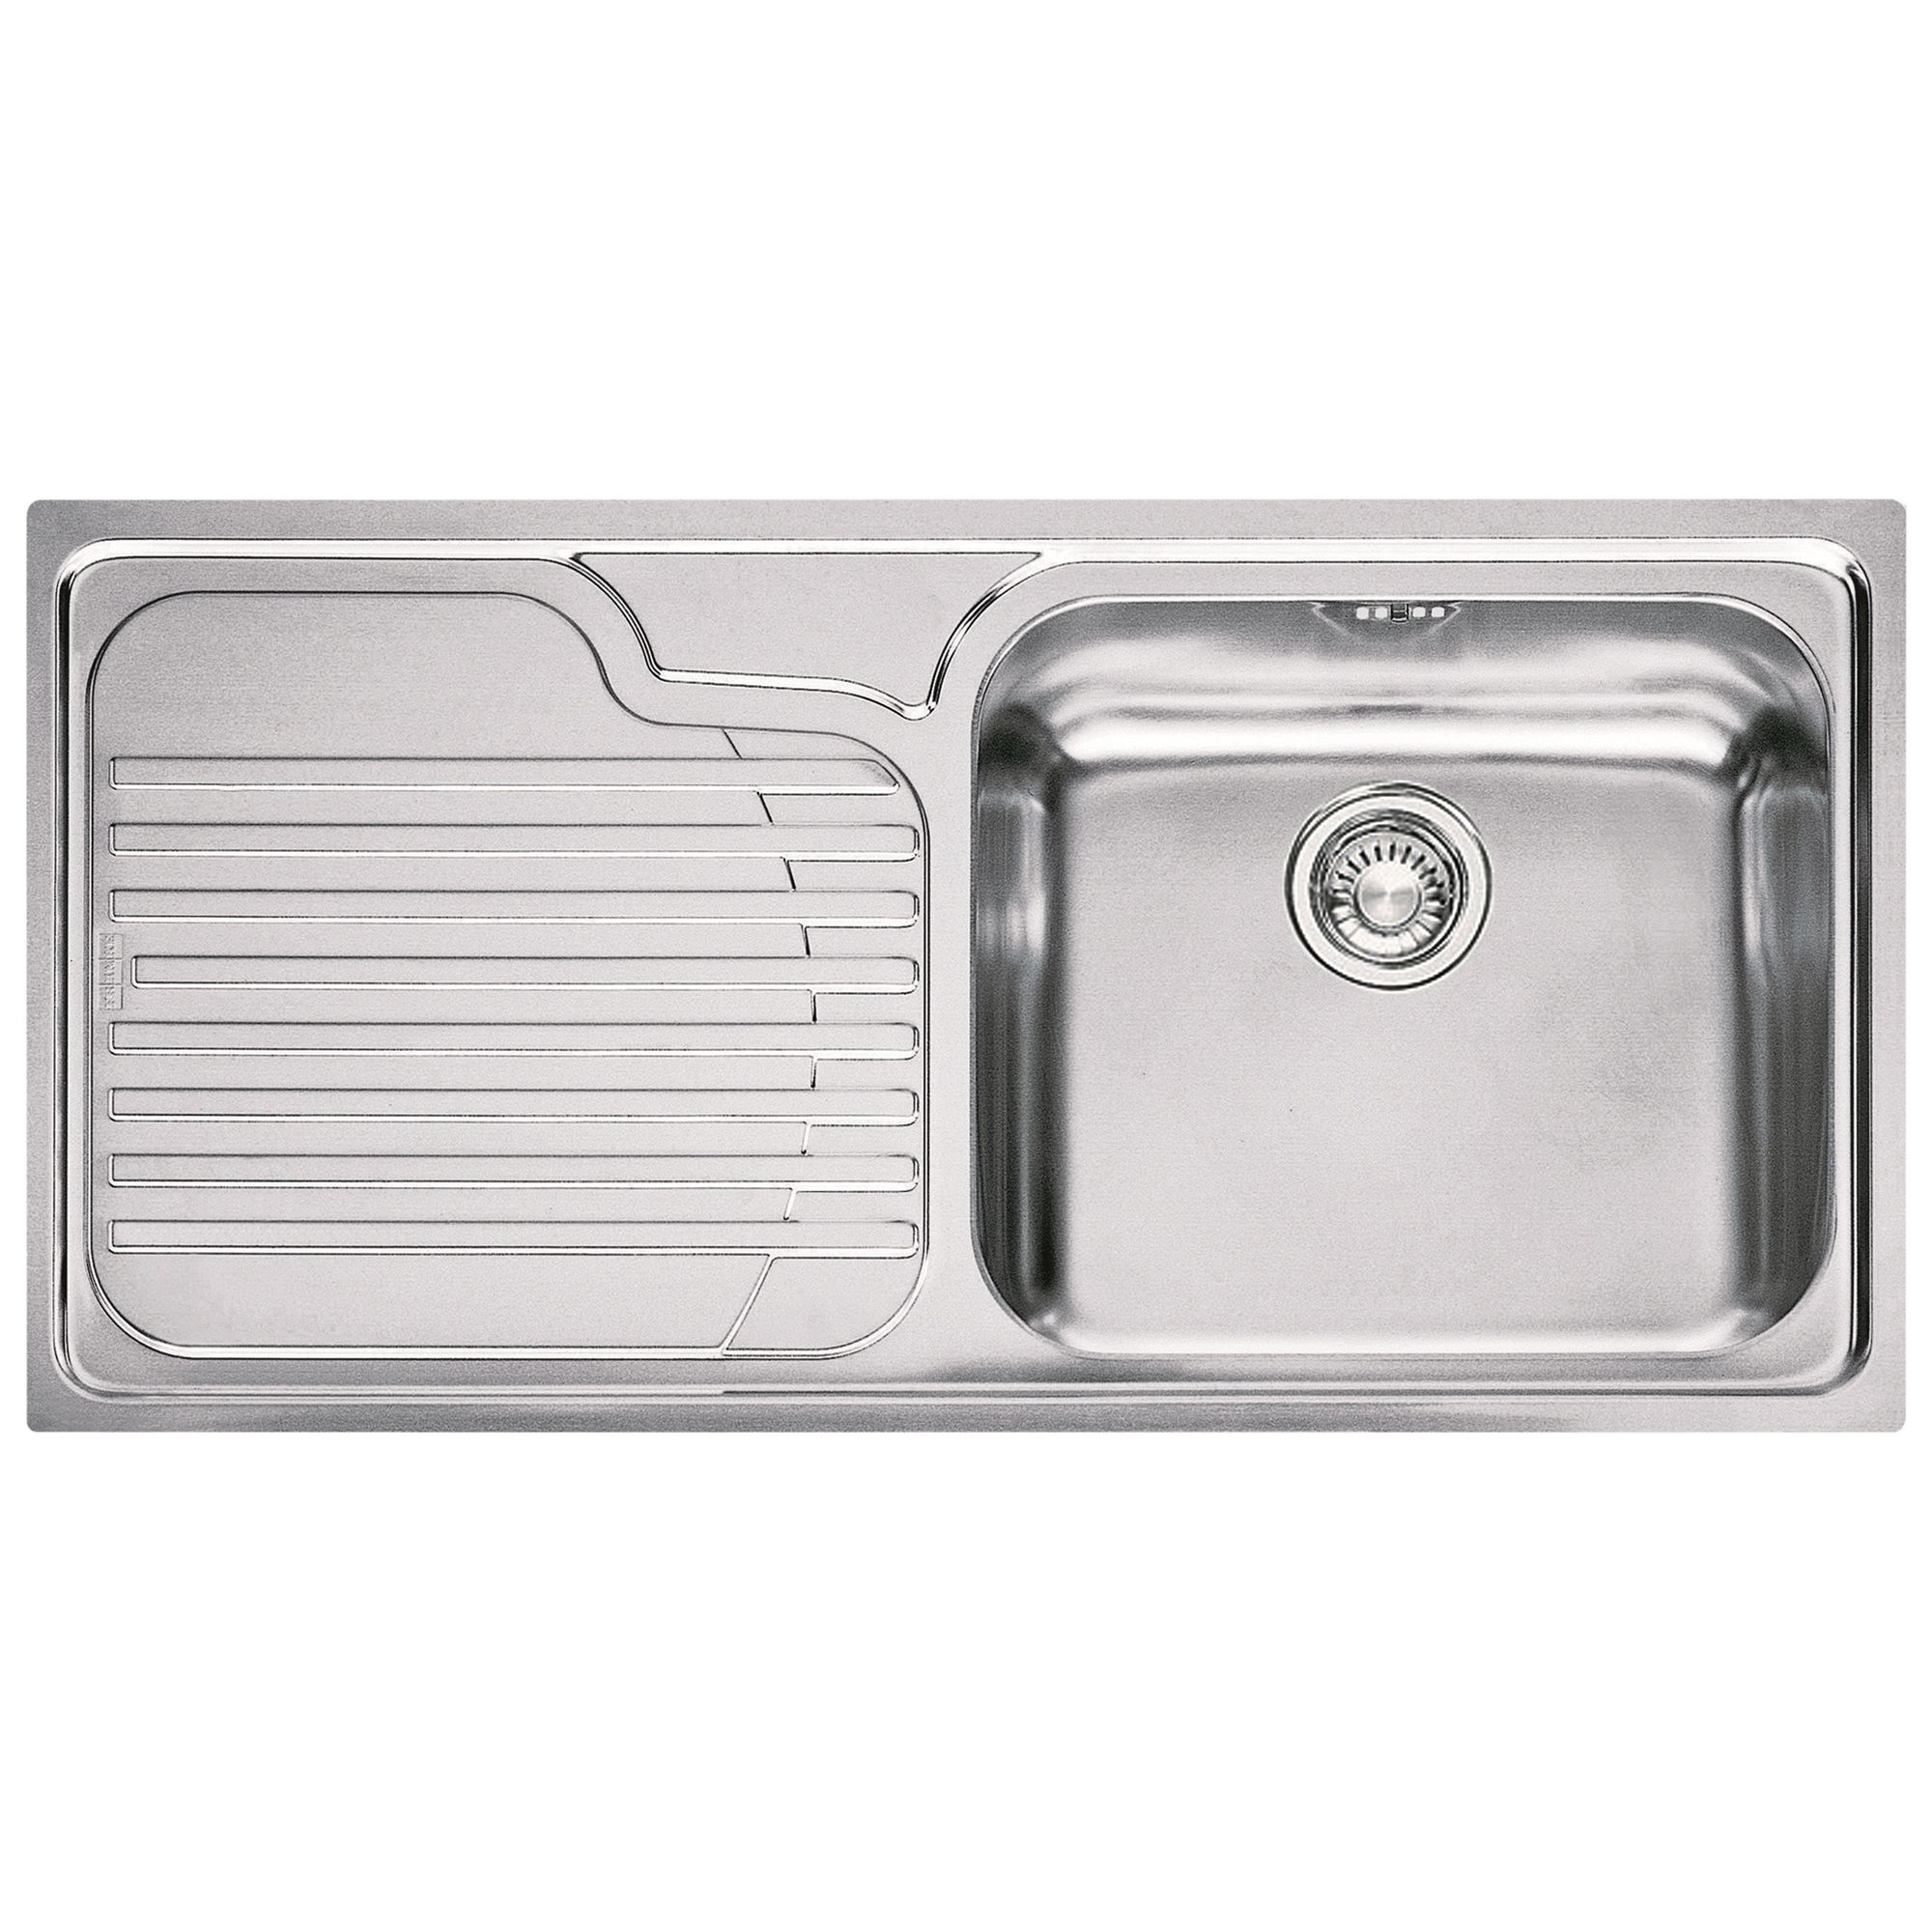 Franke Galassia GAX 611 Inset Kitchen Sink with Right Hand Bowl, Stainless Steel